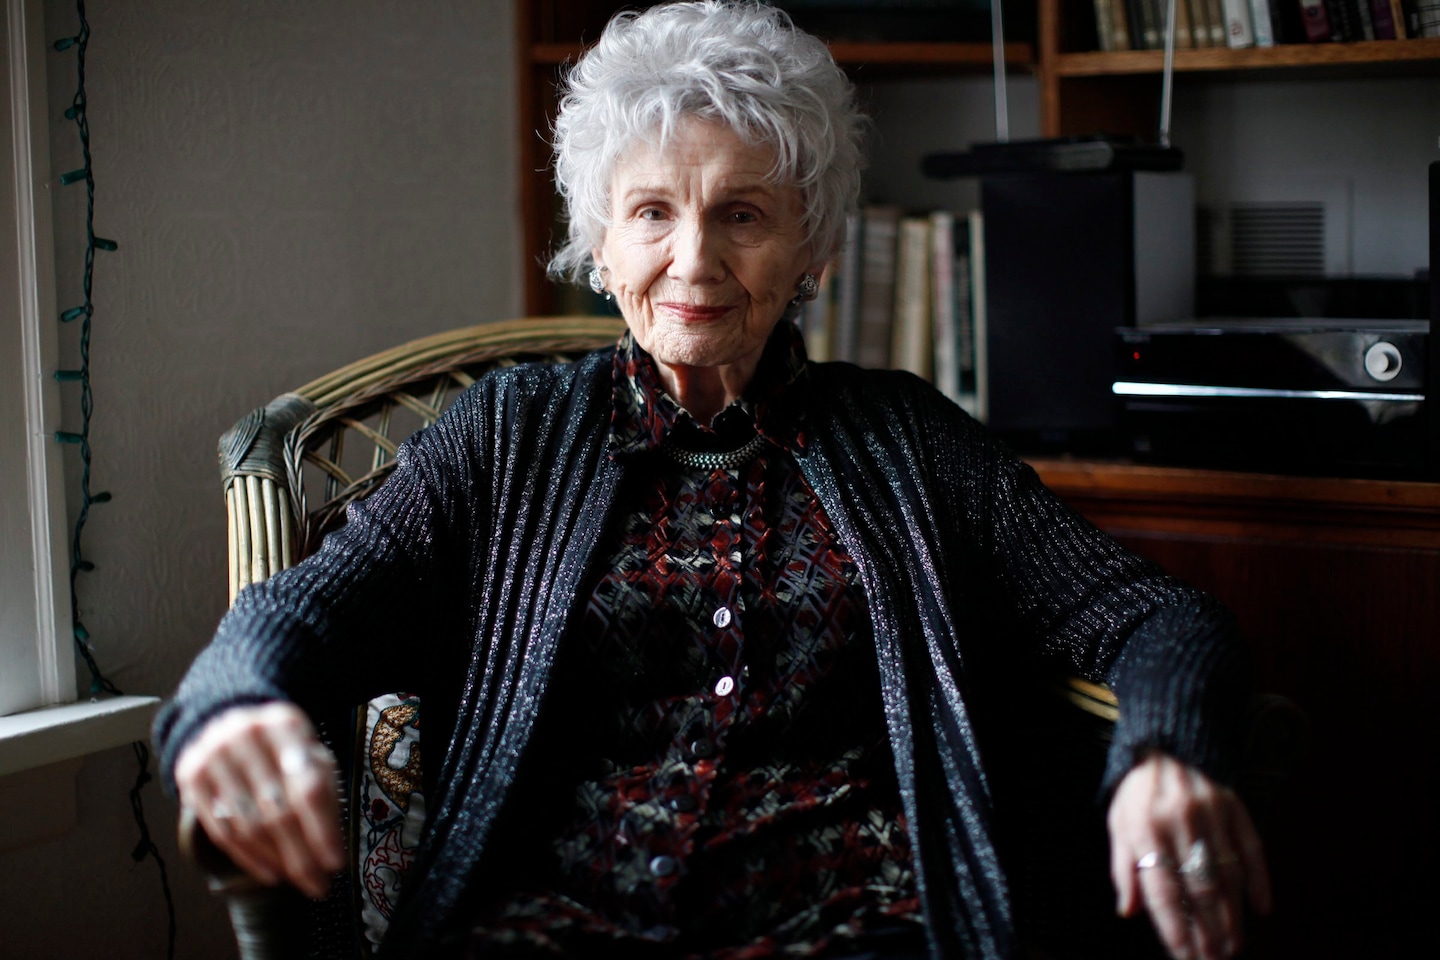 Alice Munro was a Canadian icon. Then came the abuse revelations.